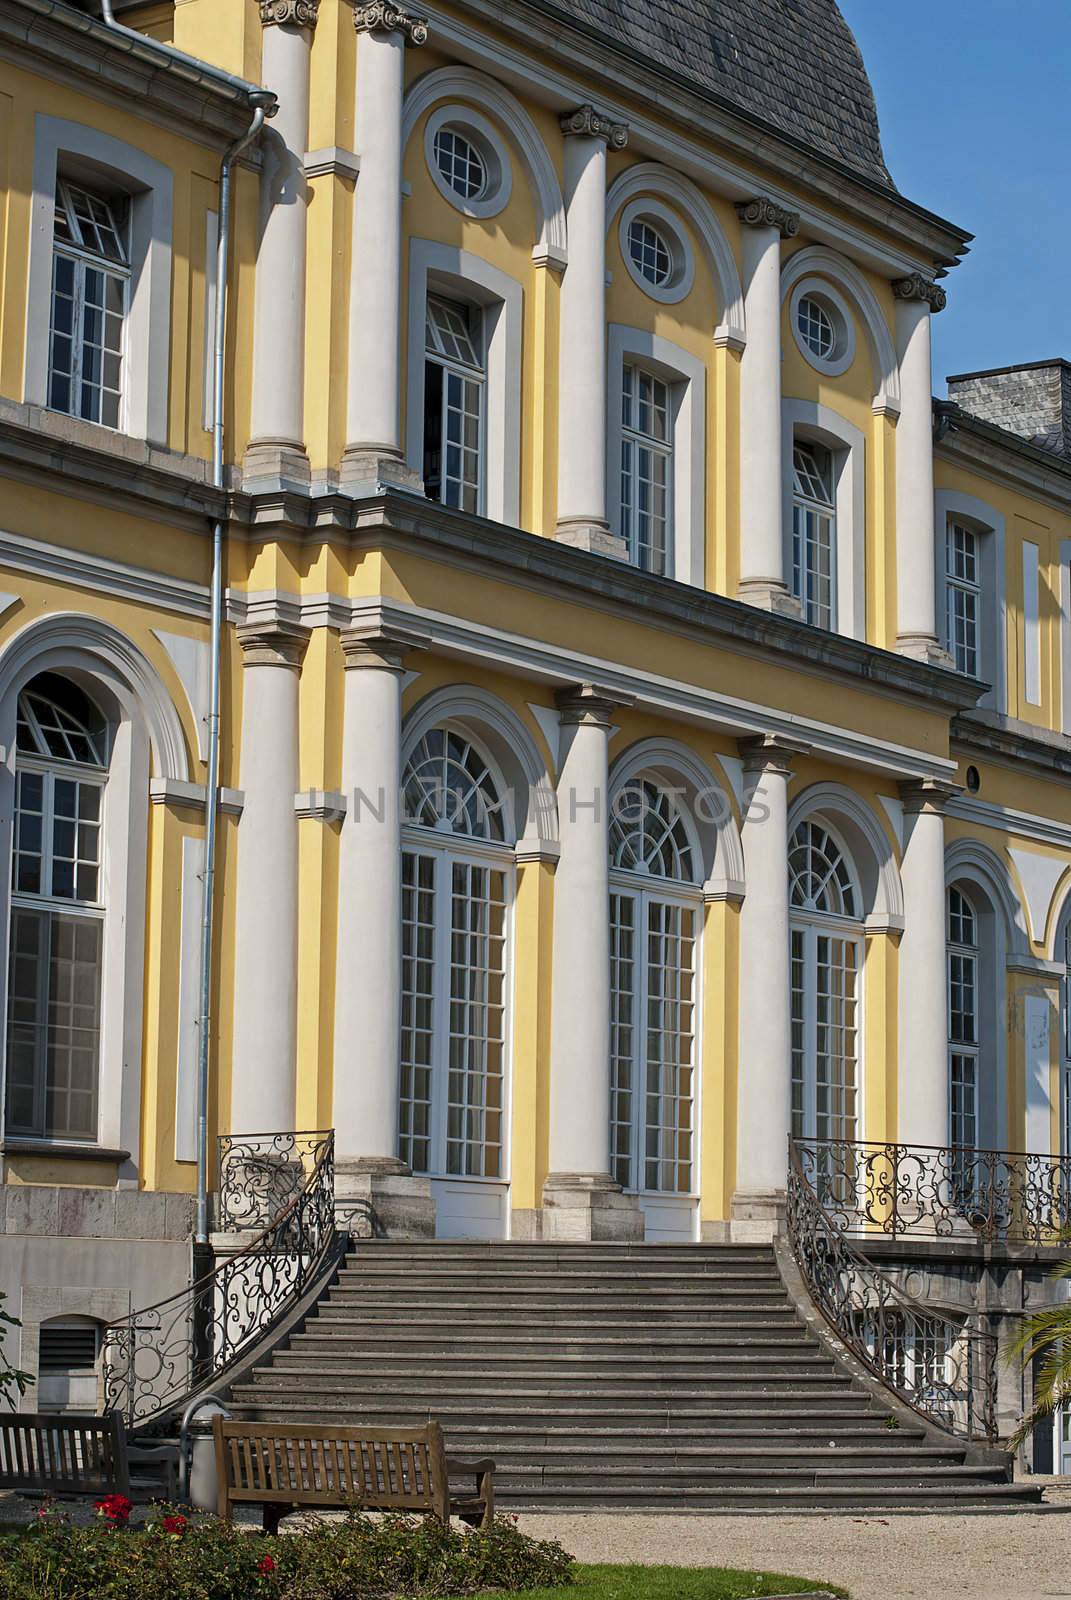 Castle Poppelsdorf, completed in 1753 by Clemens August, in the center of Bonn, Germany